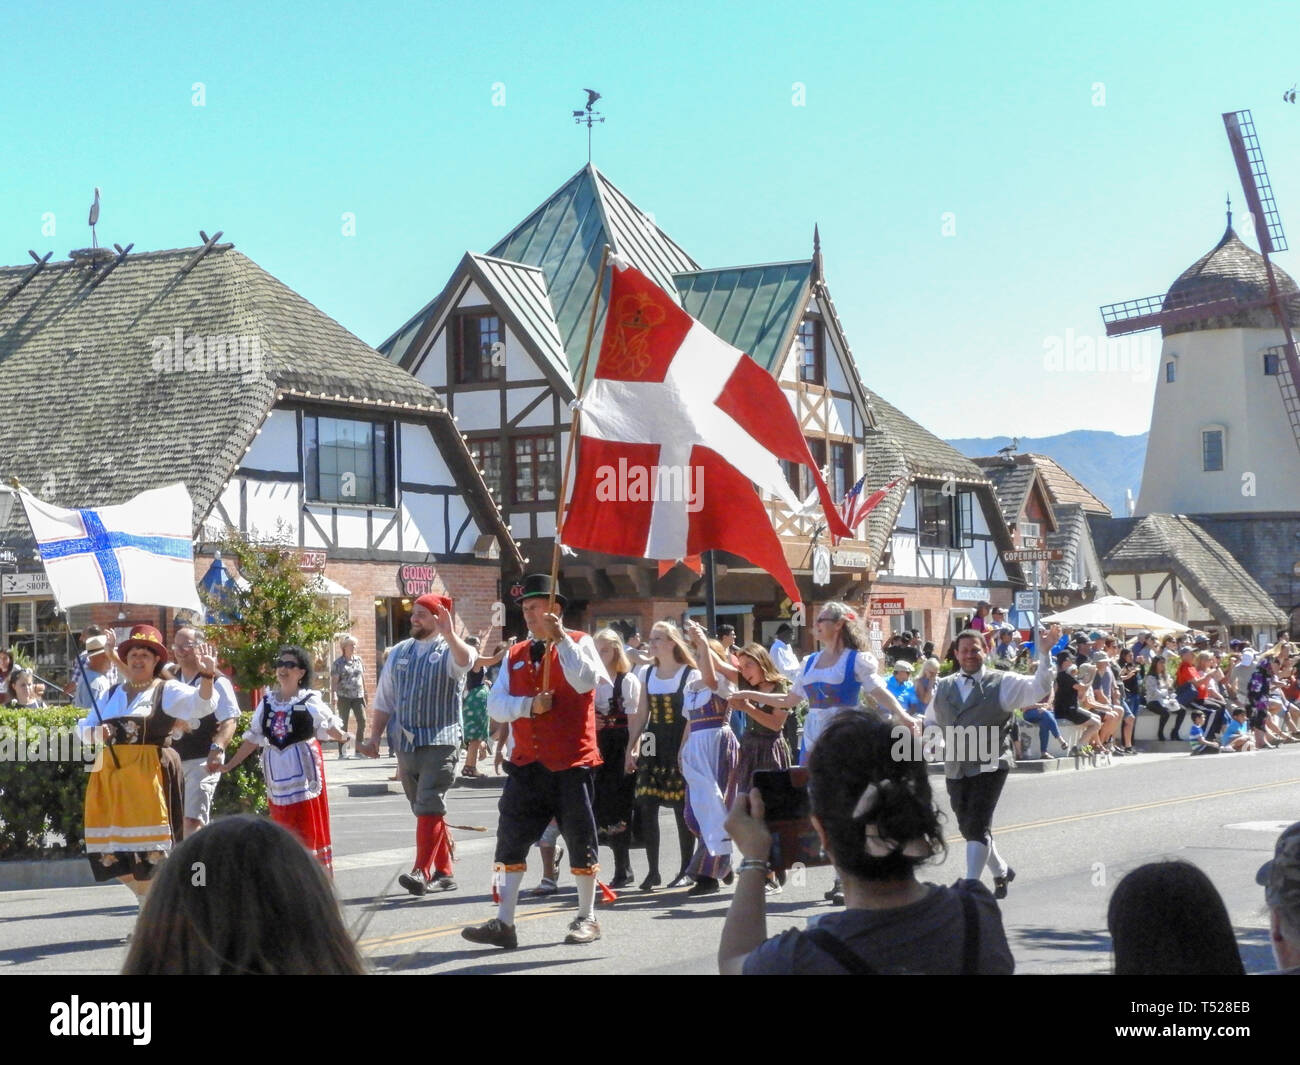 Danish Days parade, with people dressed in Danish costumes caring the